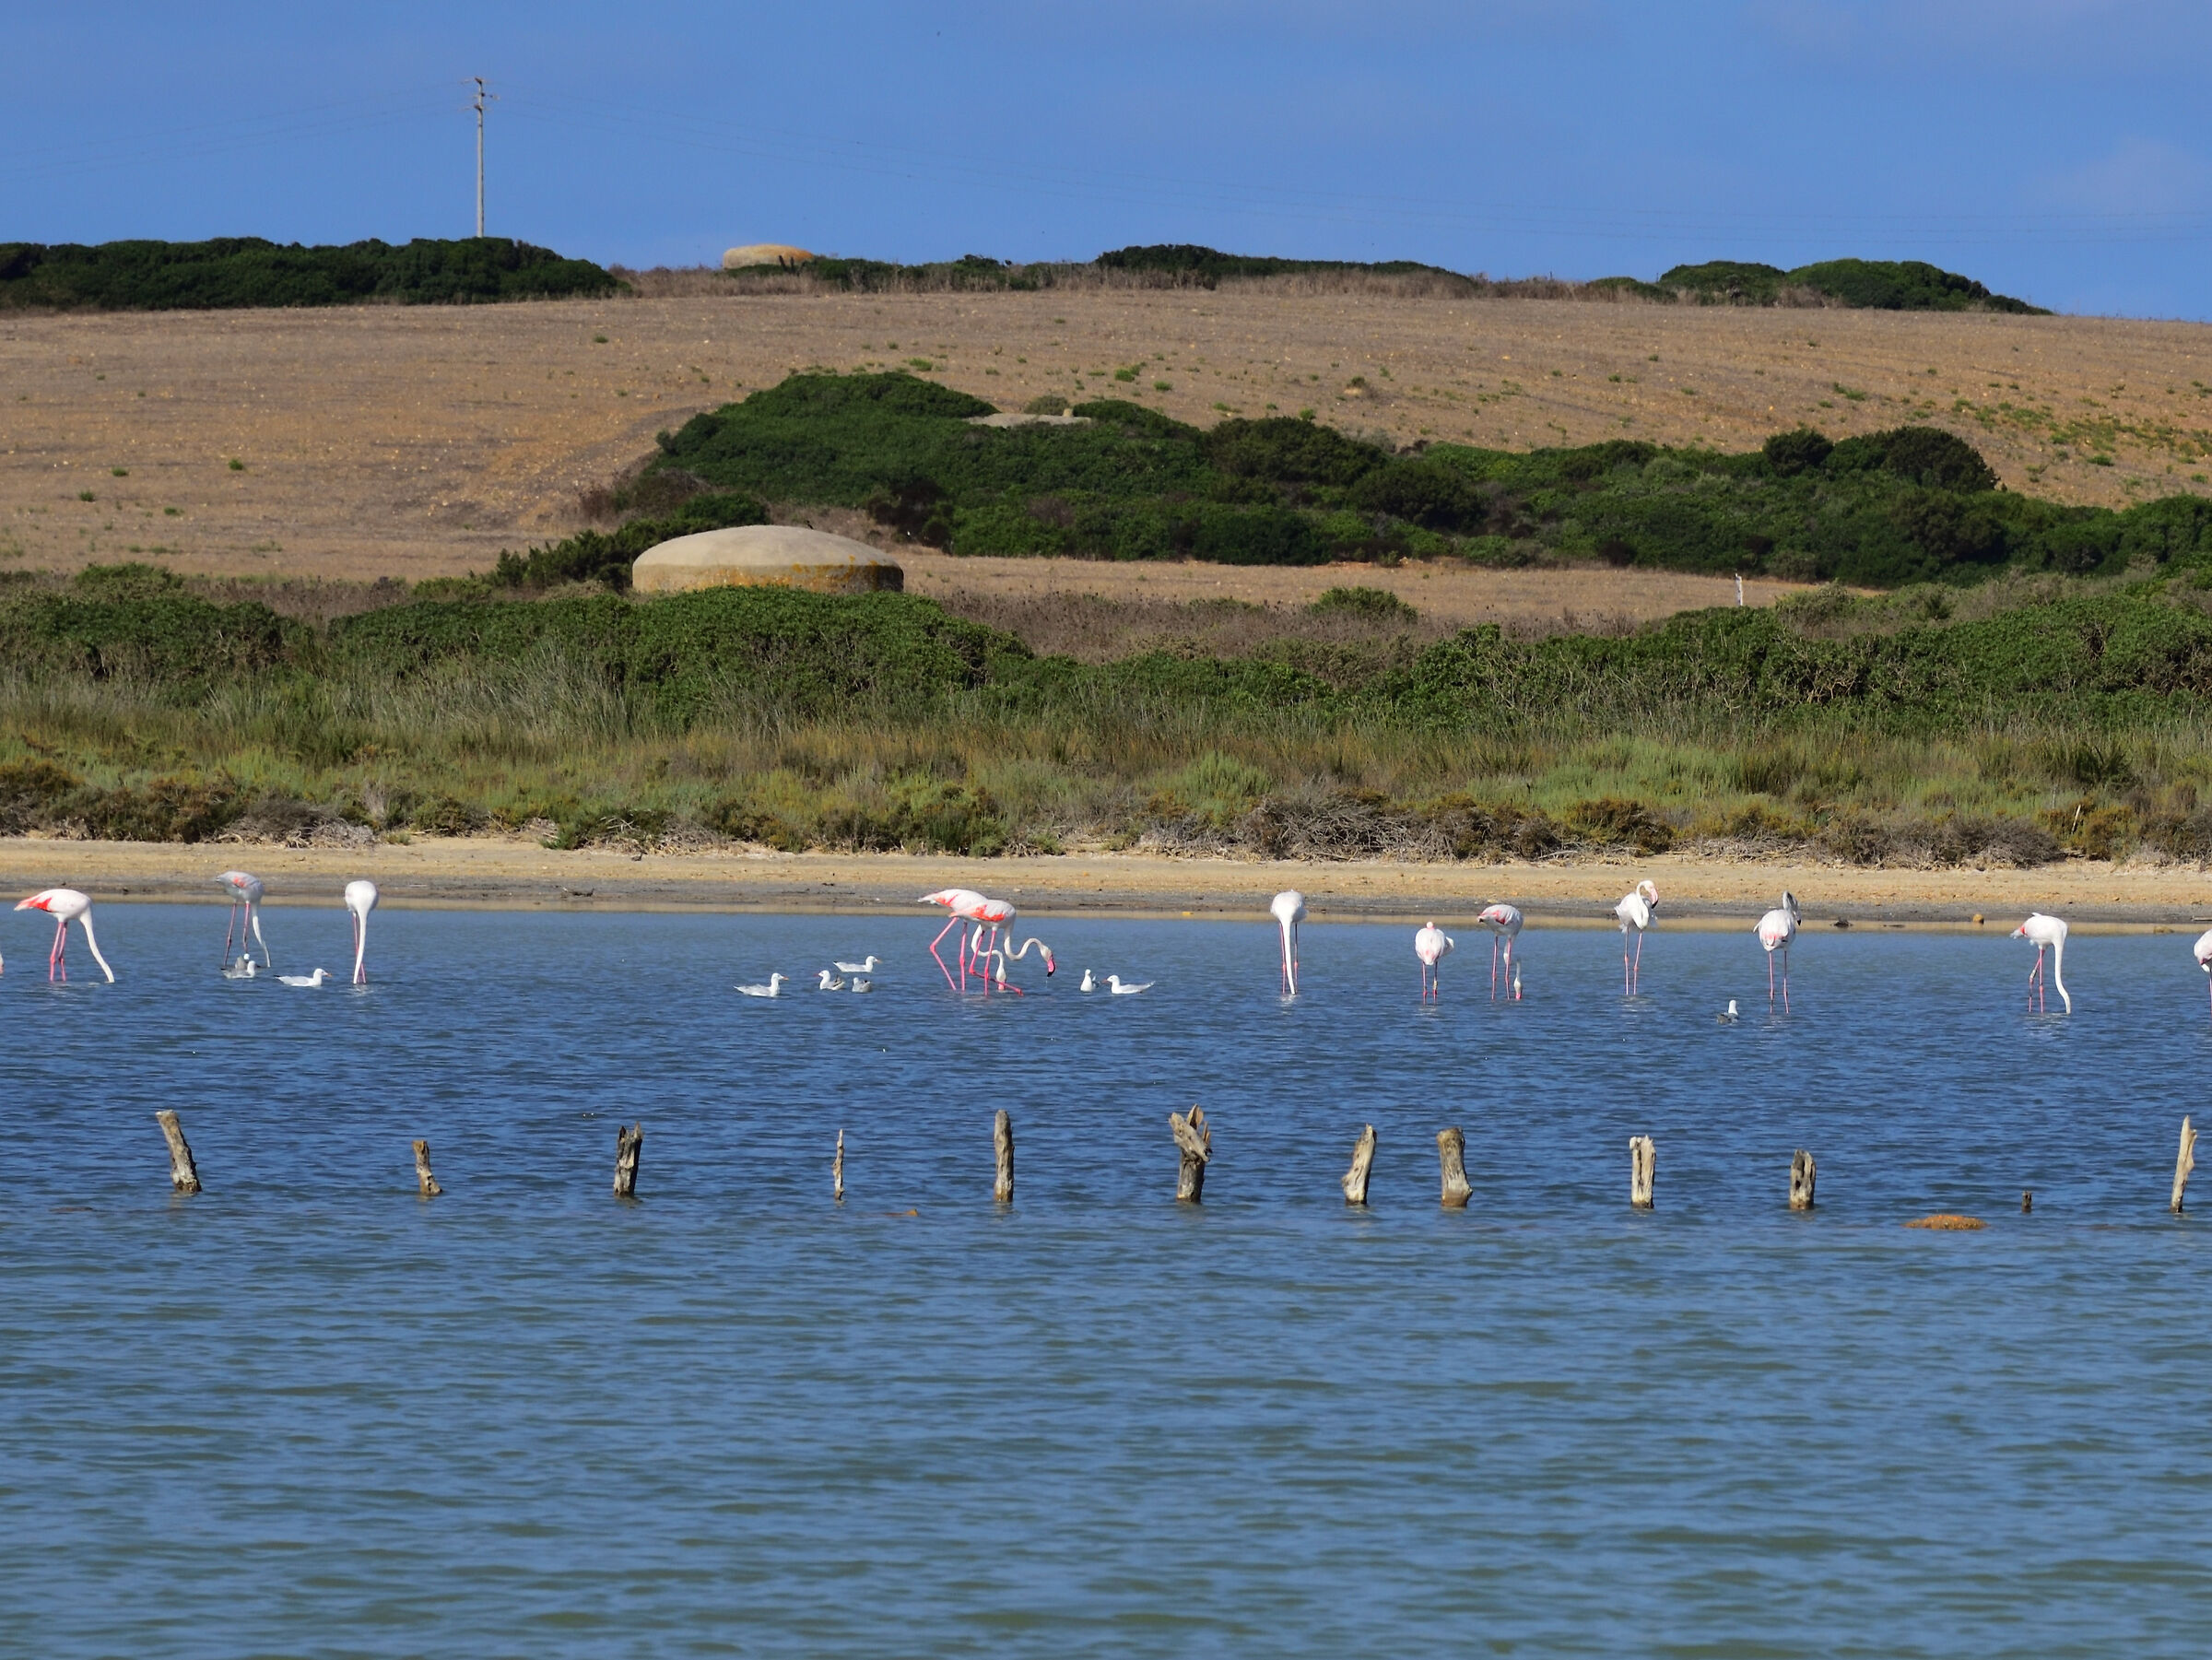 stagno delle Saline (SS) with flamingos 1...